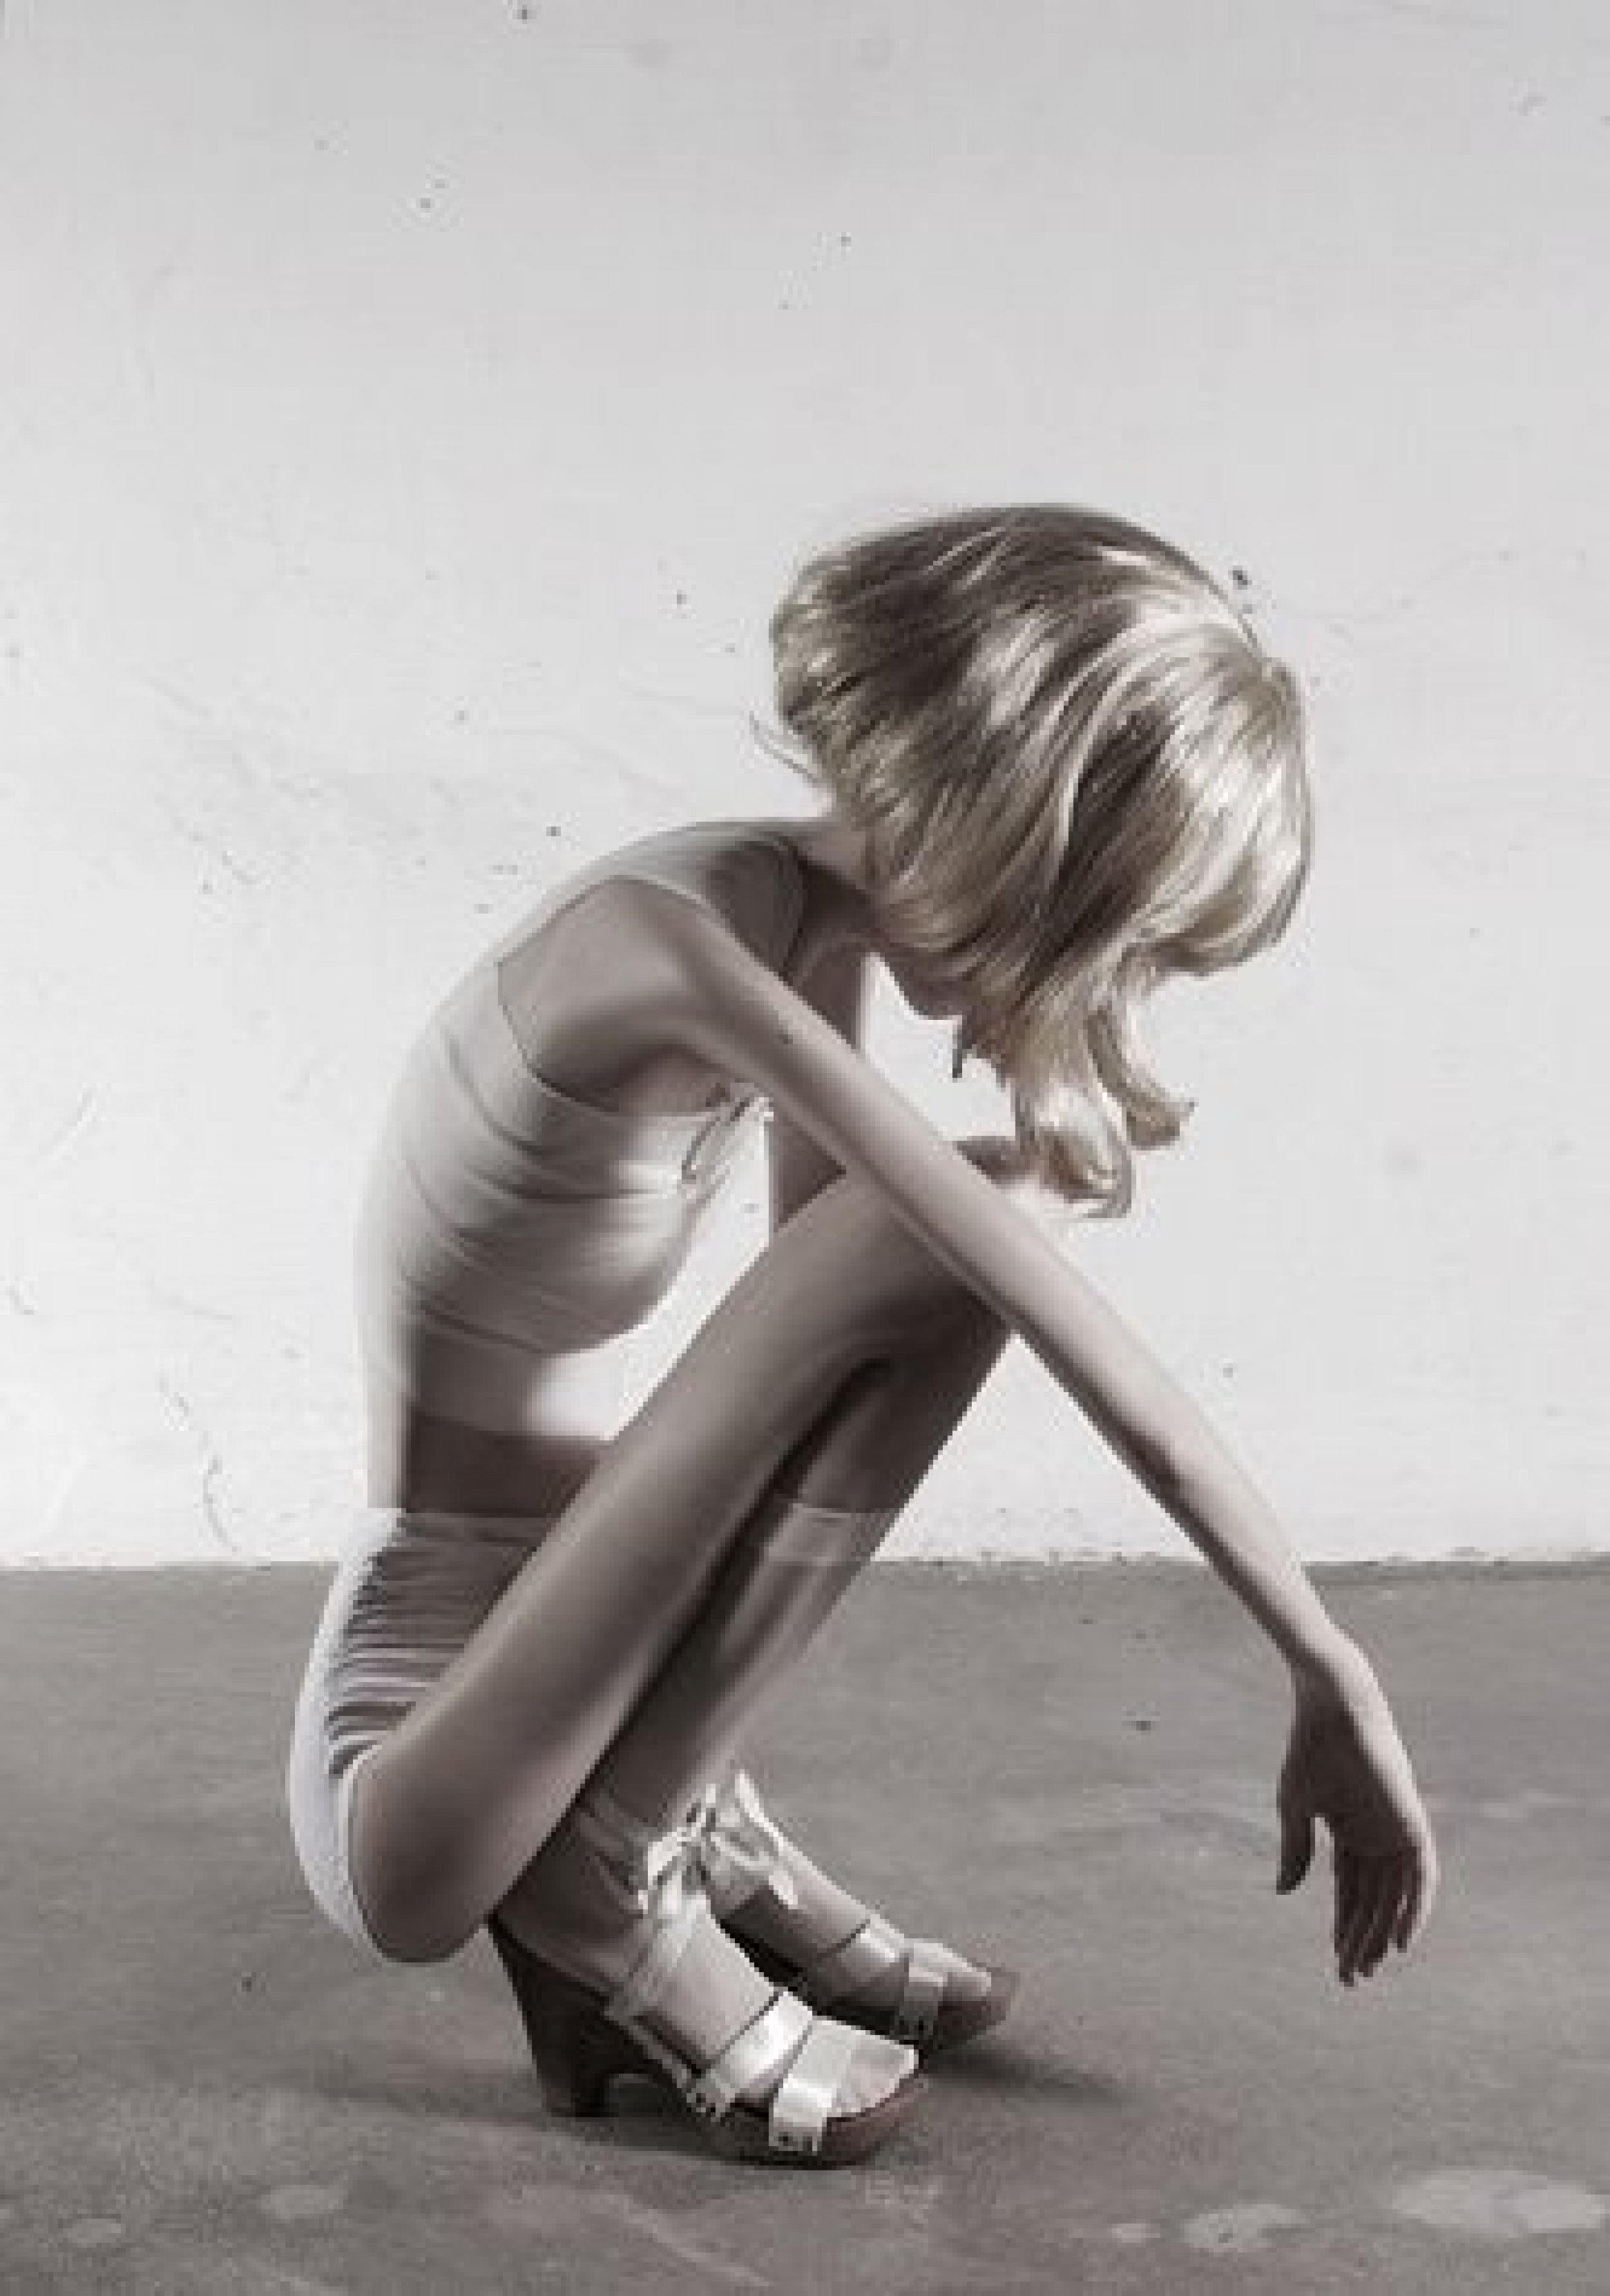 Thinspiration Debate Over Pro Anorexia Thinspo Pictures On Pinterest Tumblr Heats Up After